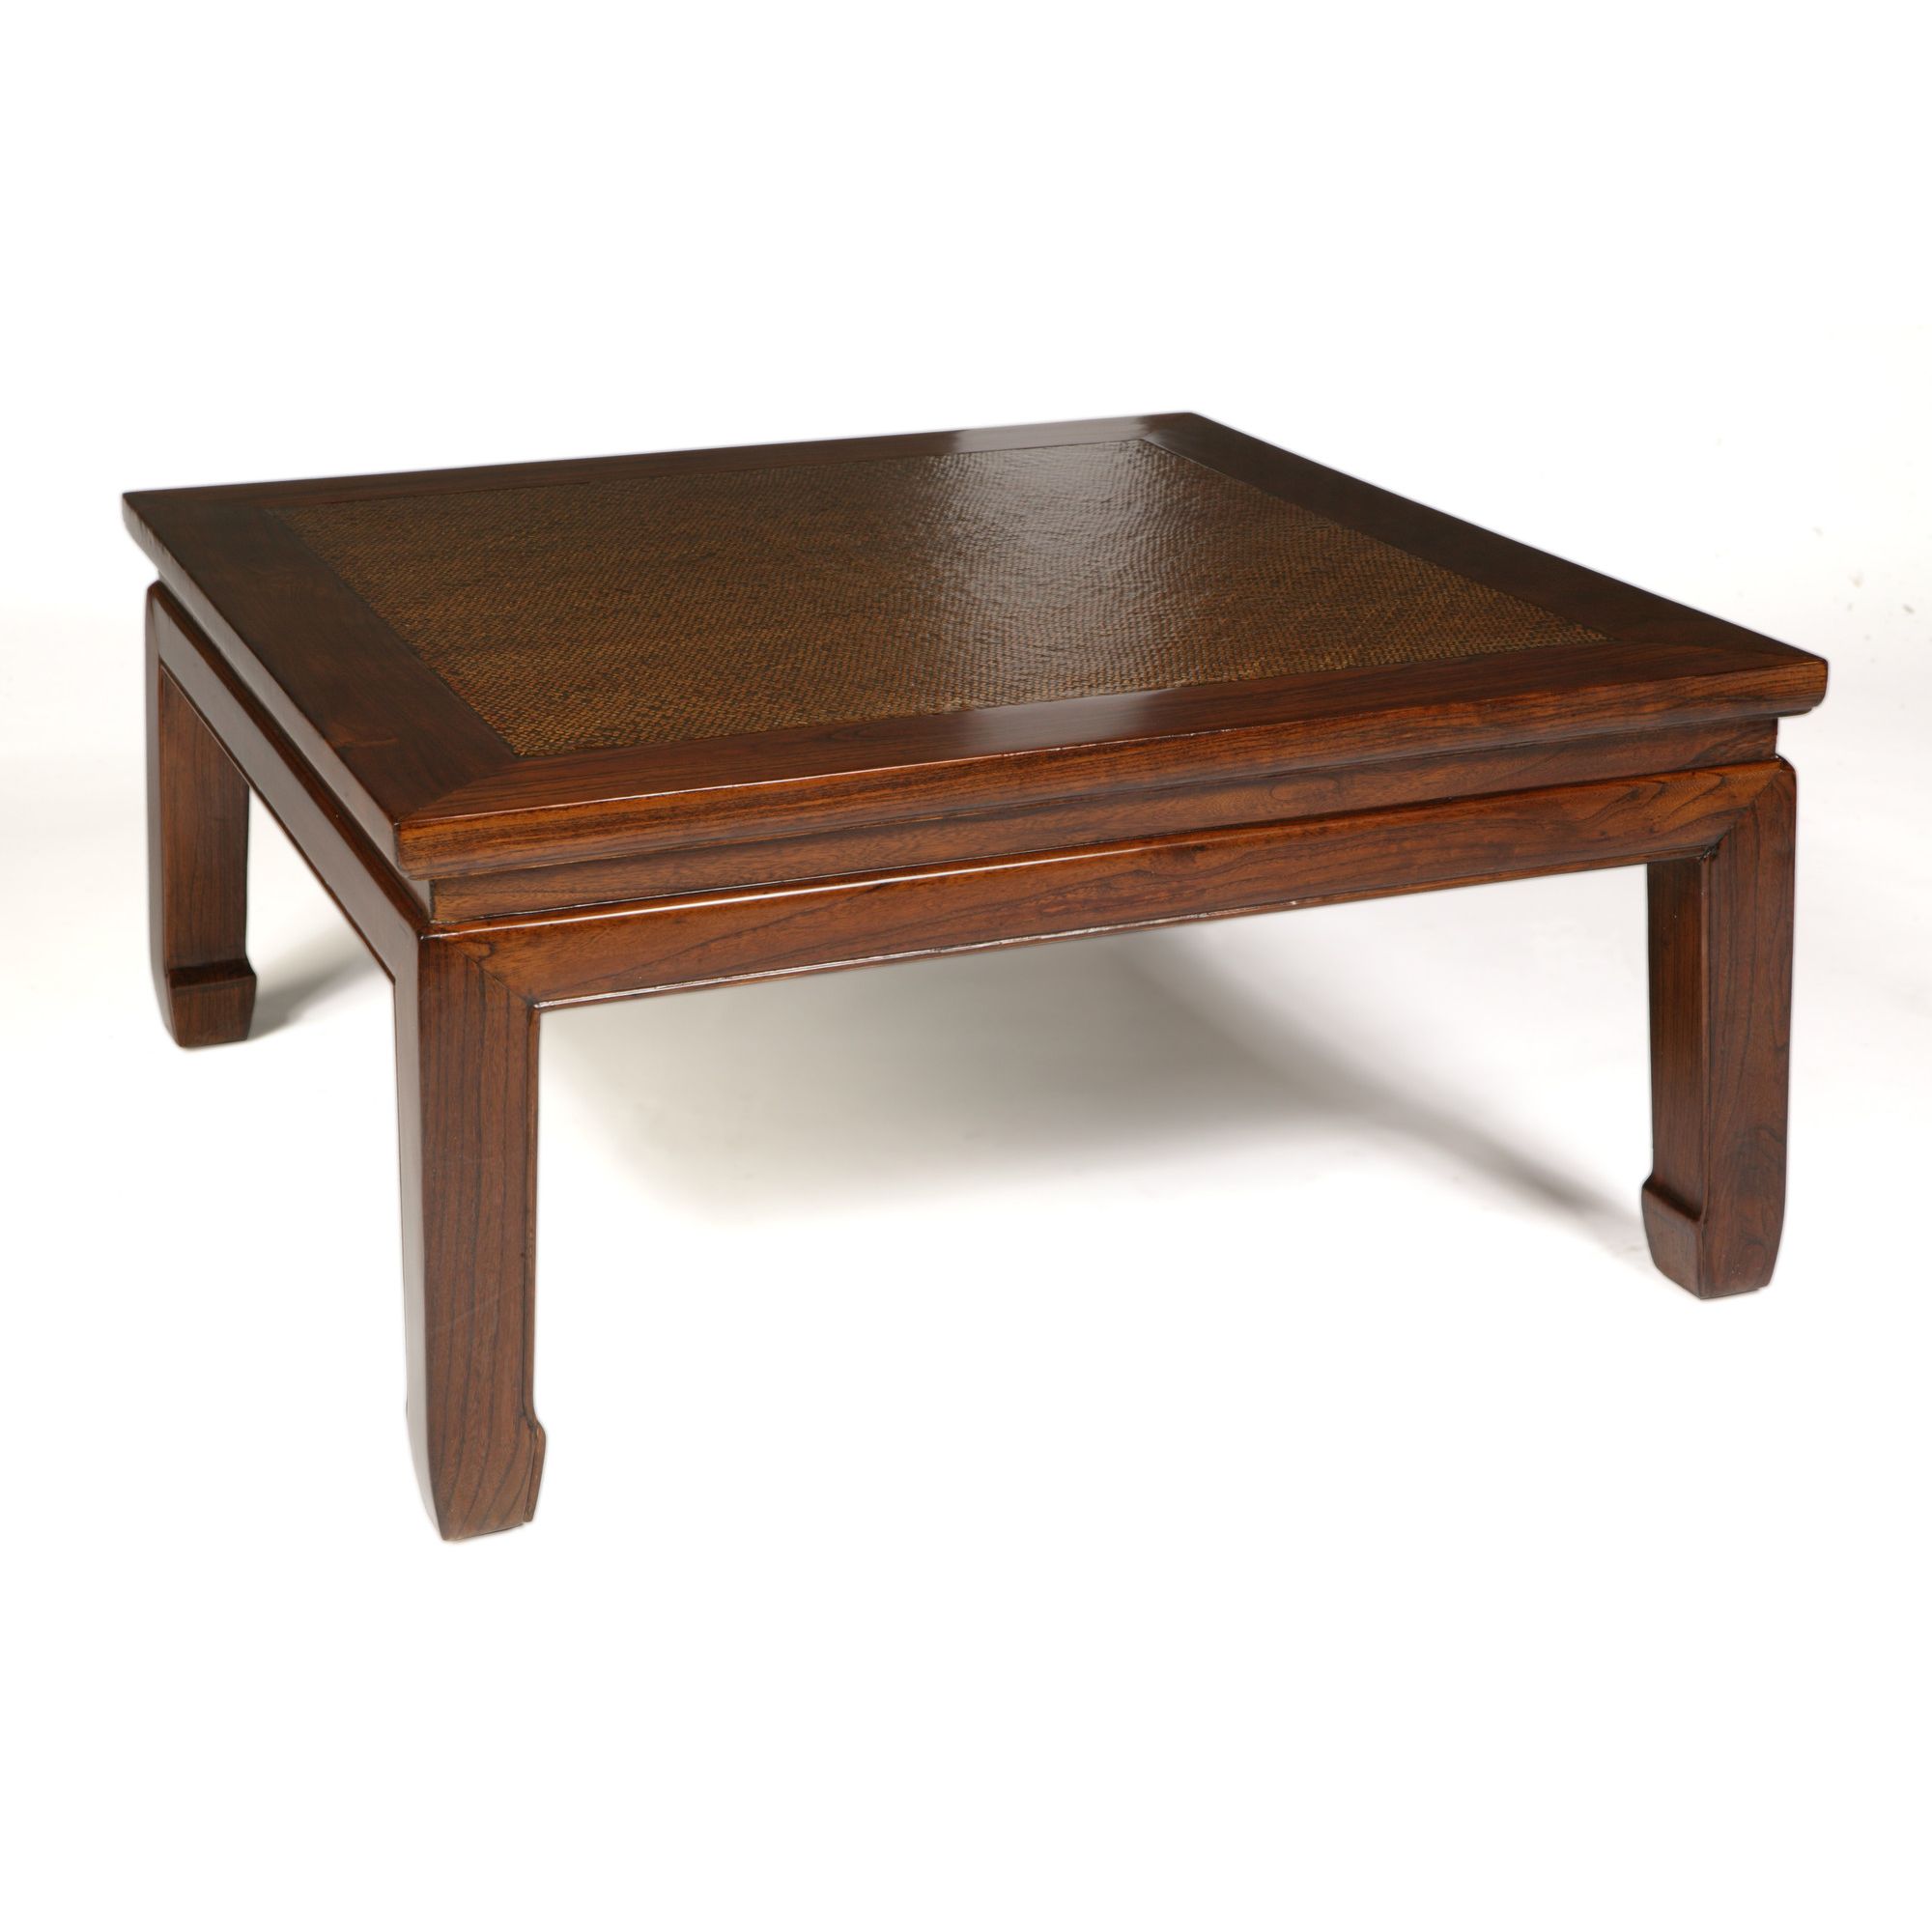 Shimu Chinese Classical Square Daybed Table - Warm Elm at Tesco Direct